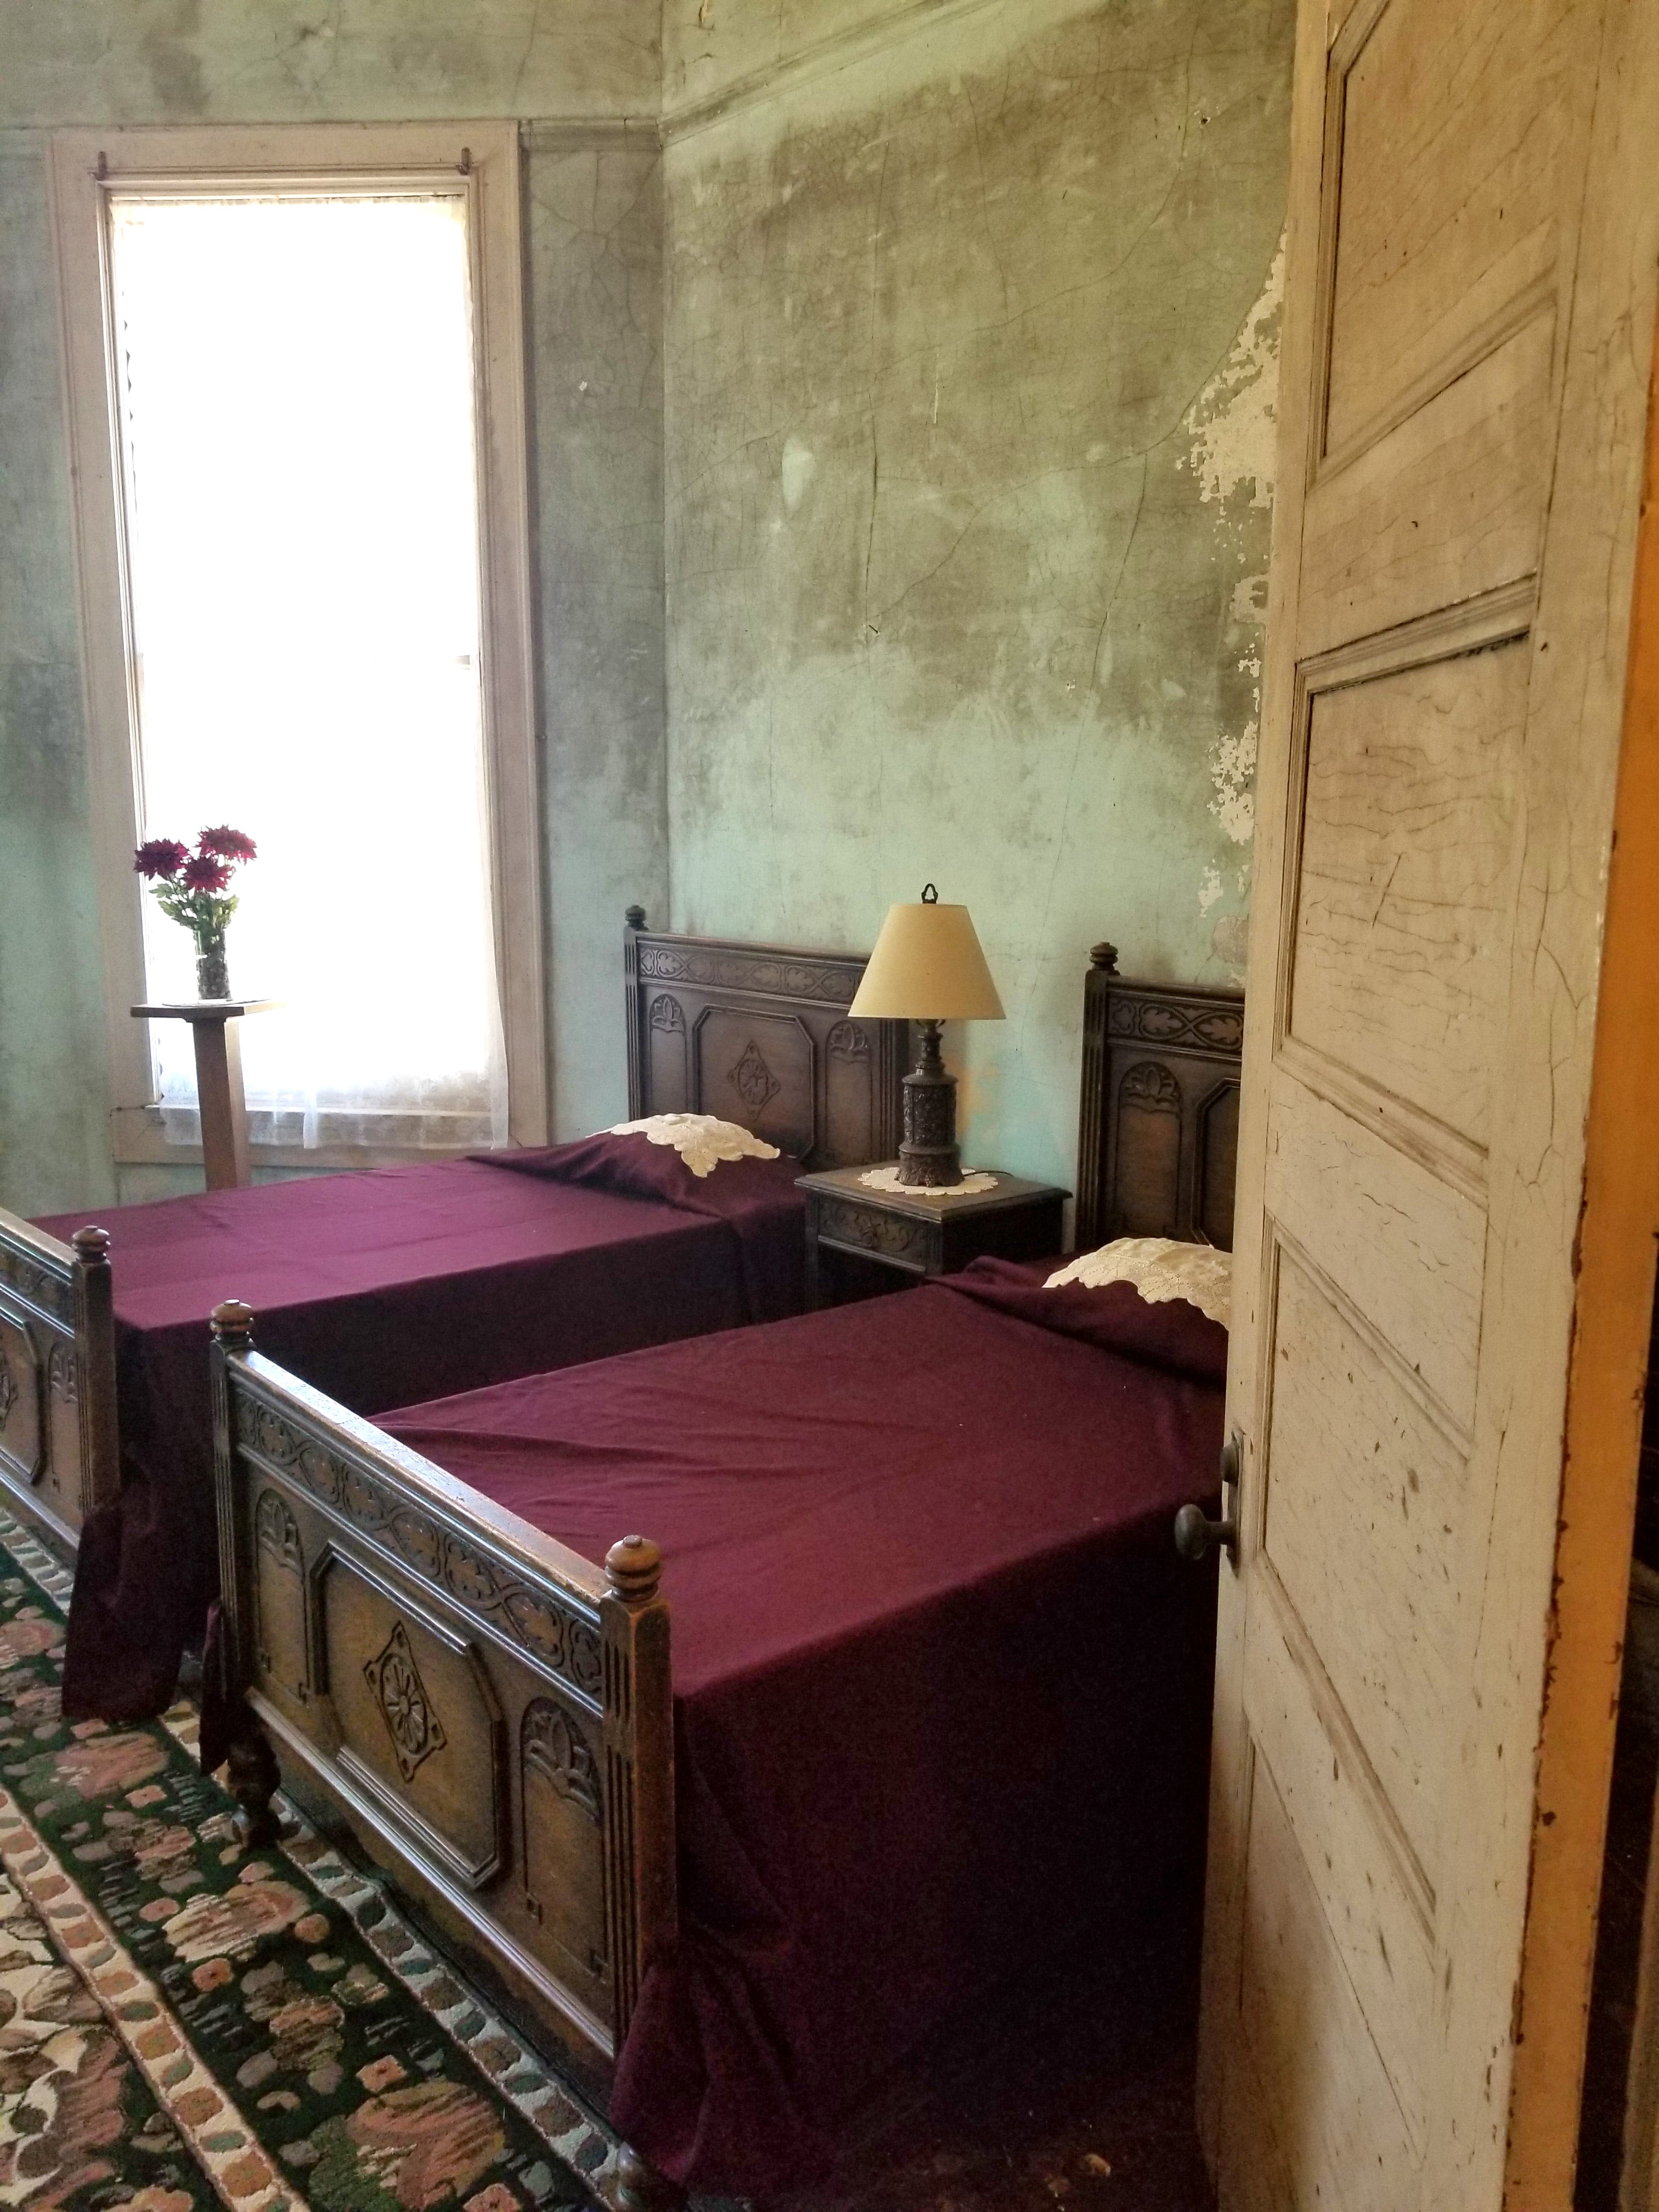 Two ornate wooden beds with burgundy bed cloths and doily pillows in bedroom